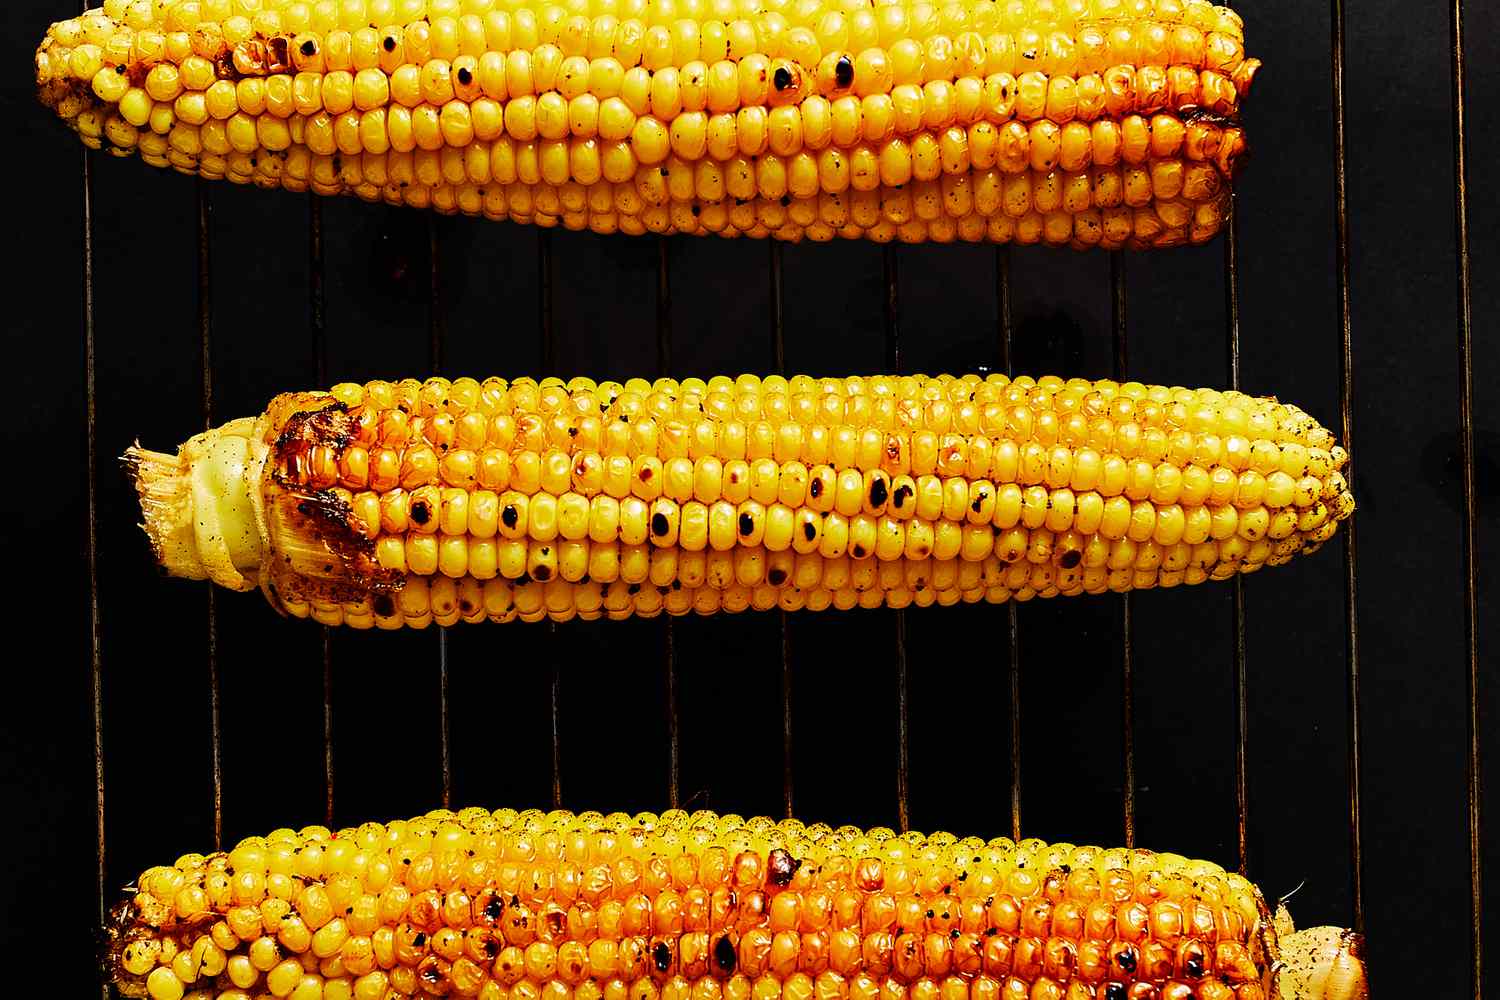 Slightly charred ears of corn cooking on on a grill